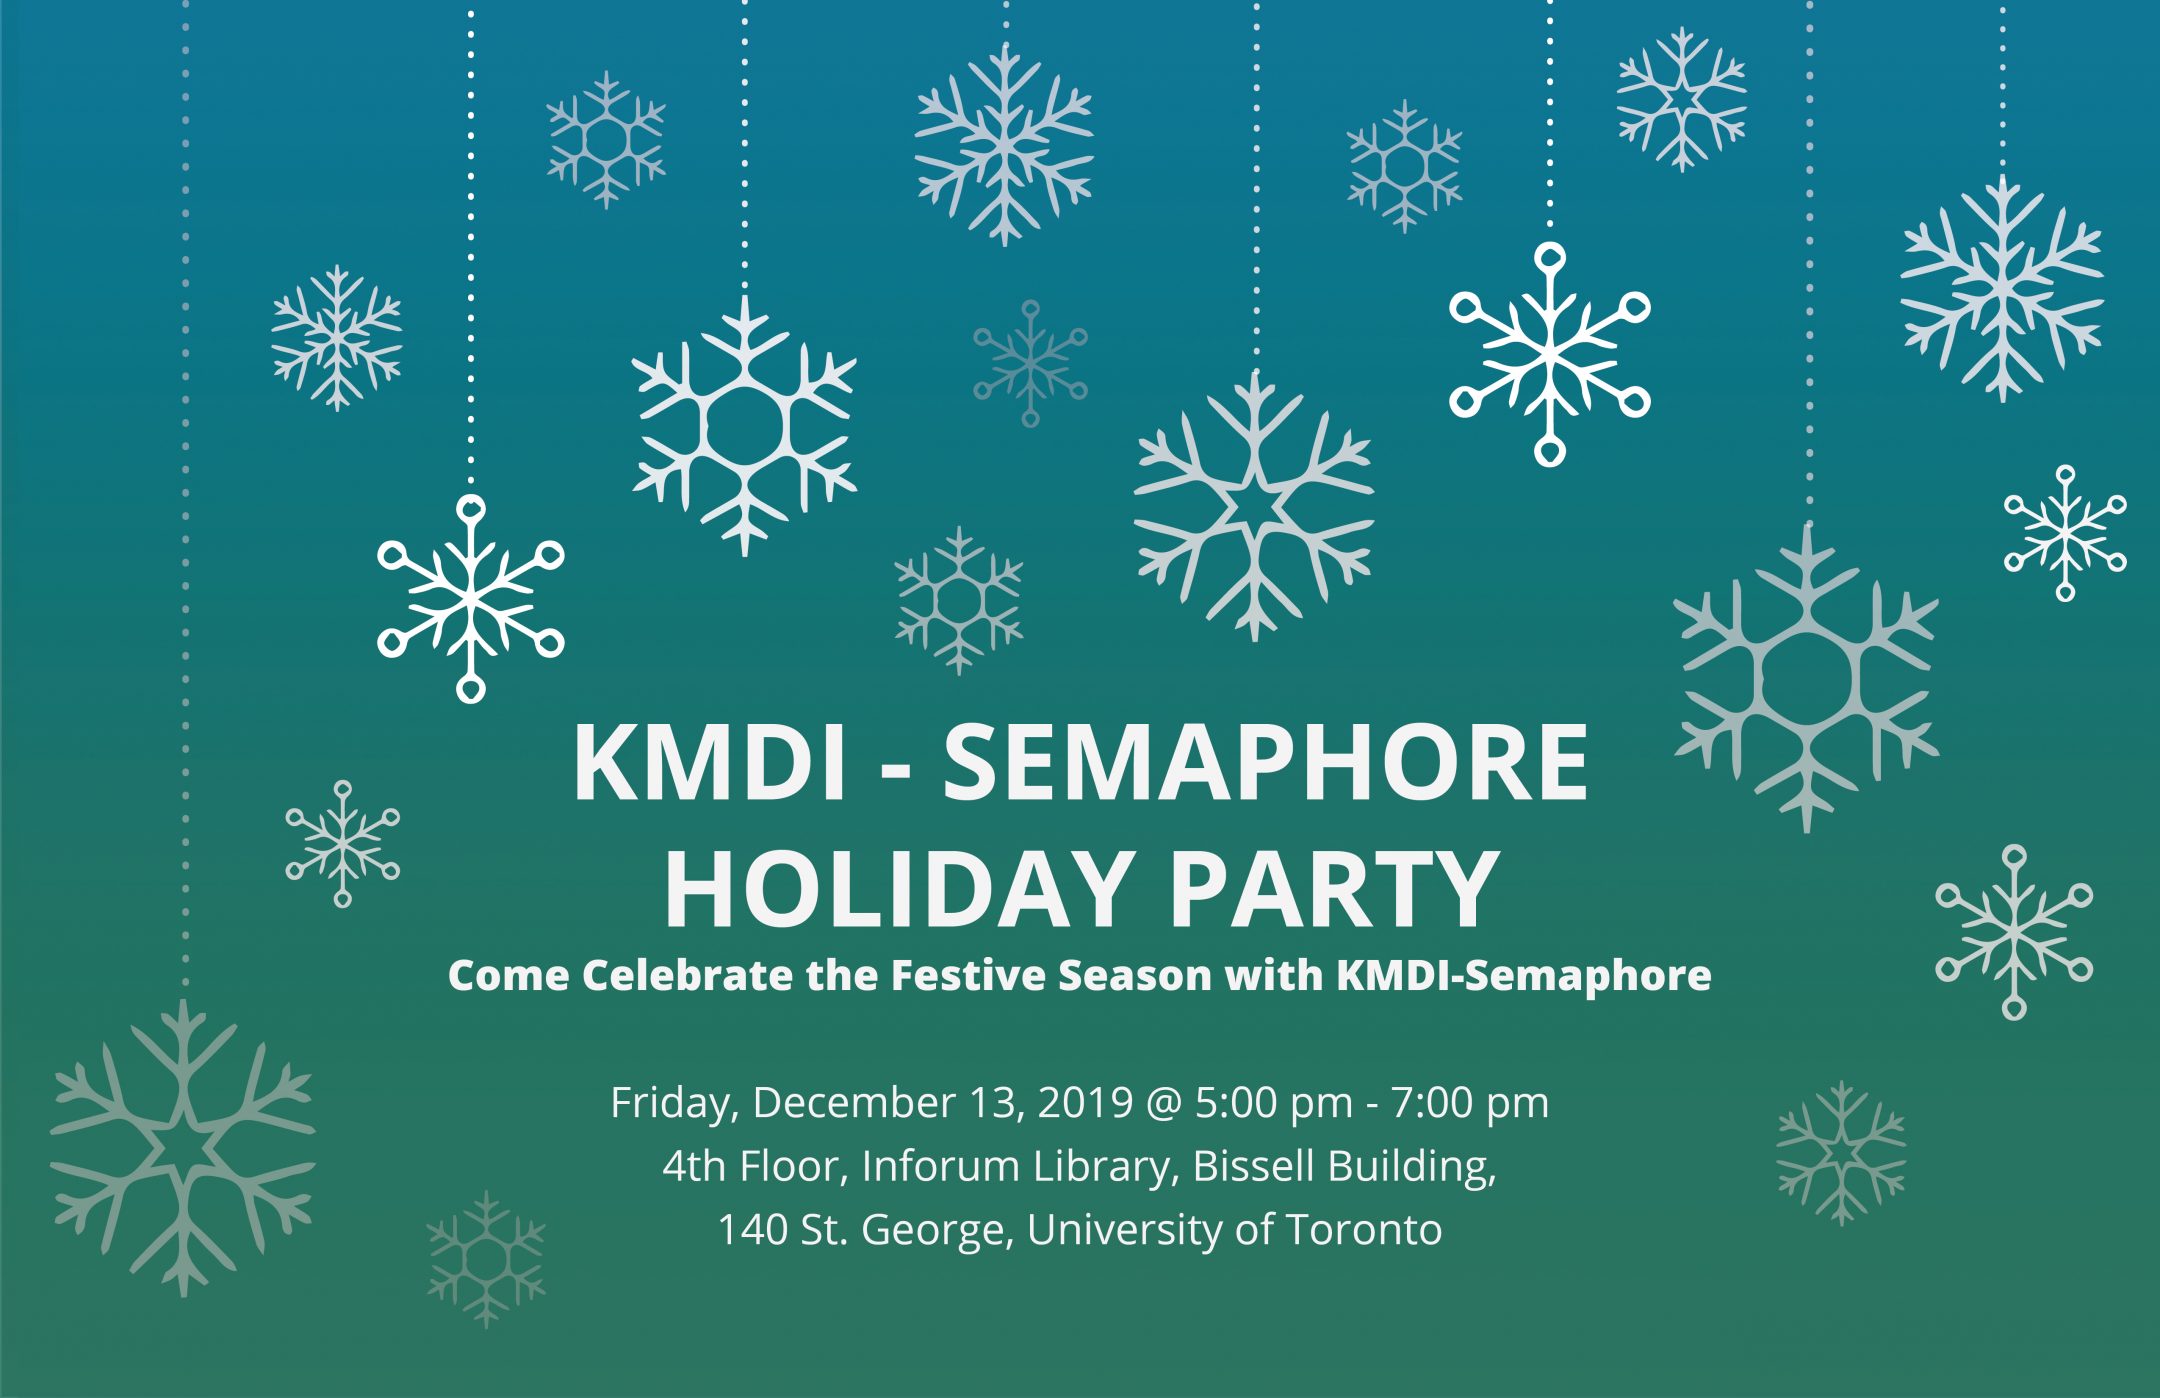 KMDI-Semaphore Holiday Party poster